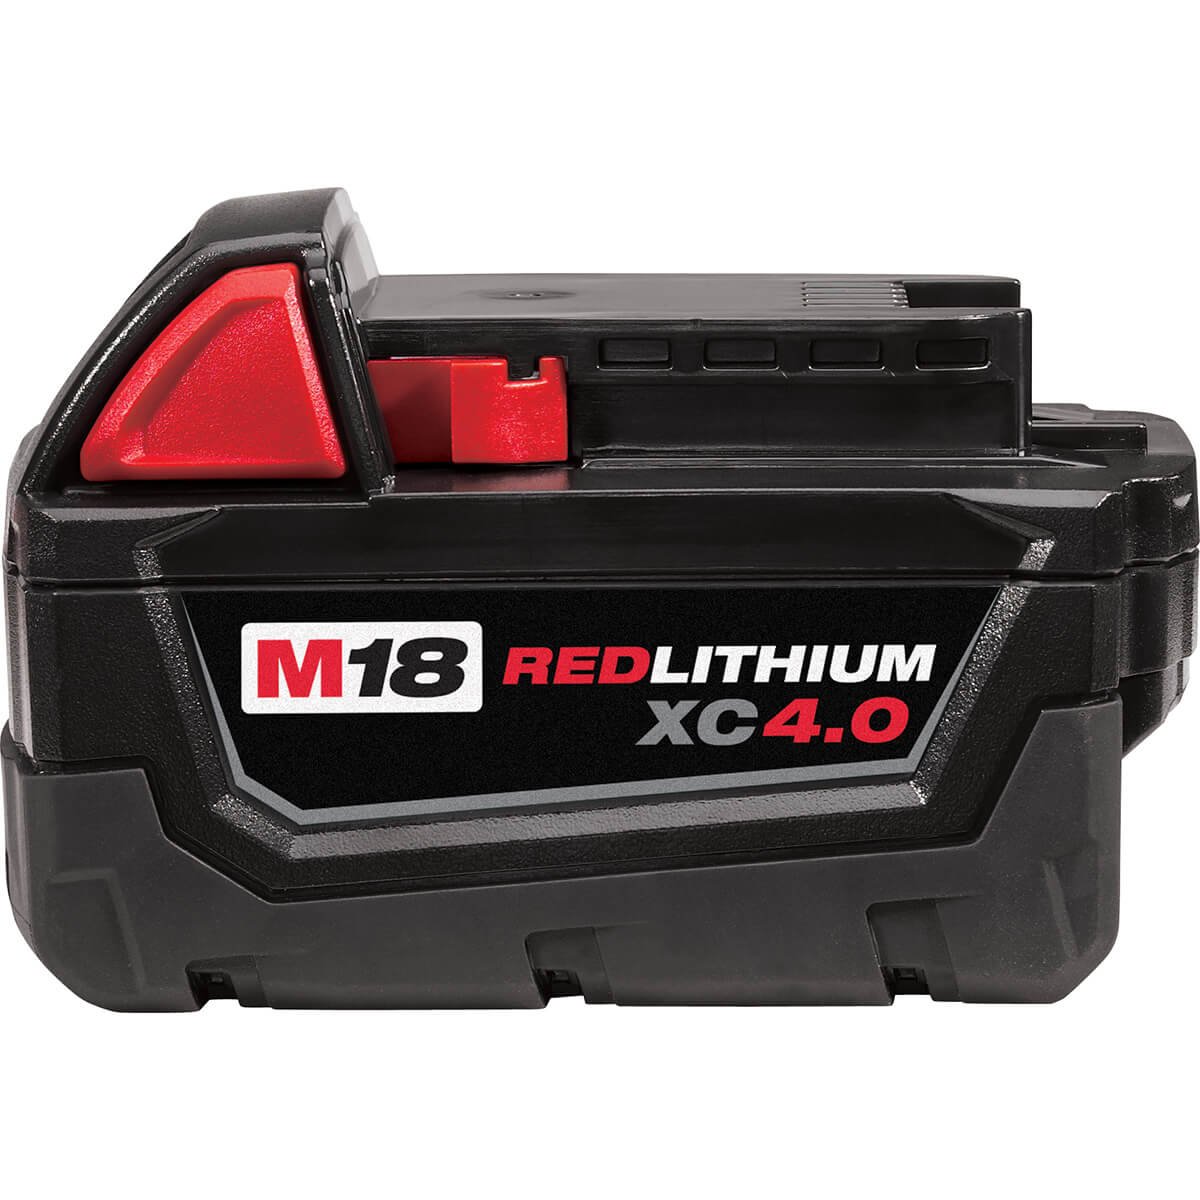 » M18™ REDLITHIUM™ XC 4.0 Extended Capacity Battery Pack (5% off)